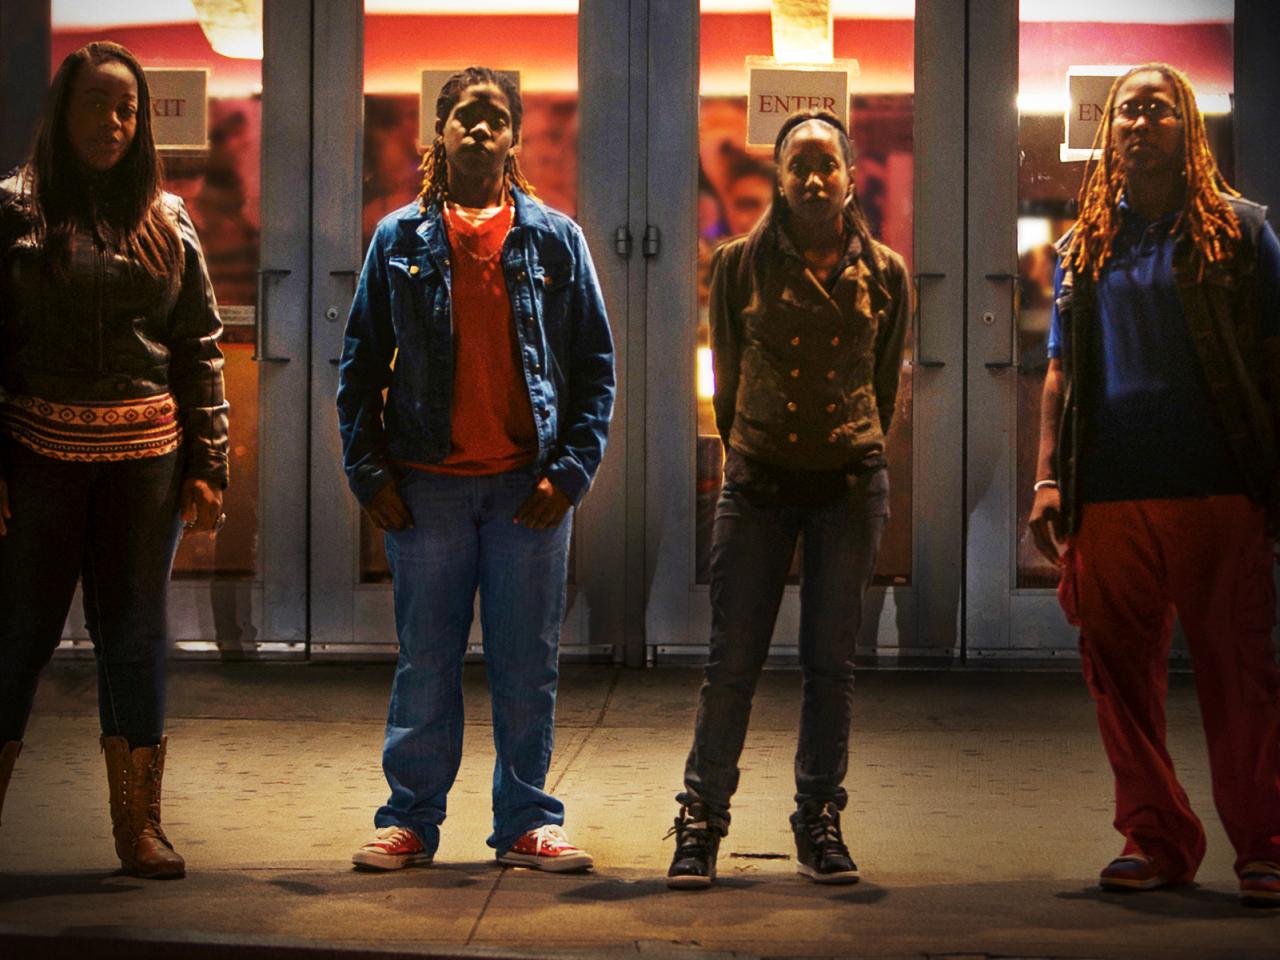 Four African American teenage girls at night in front of doors